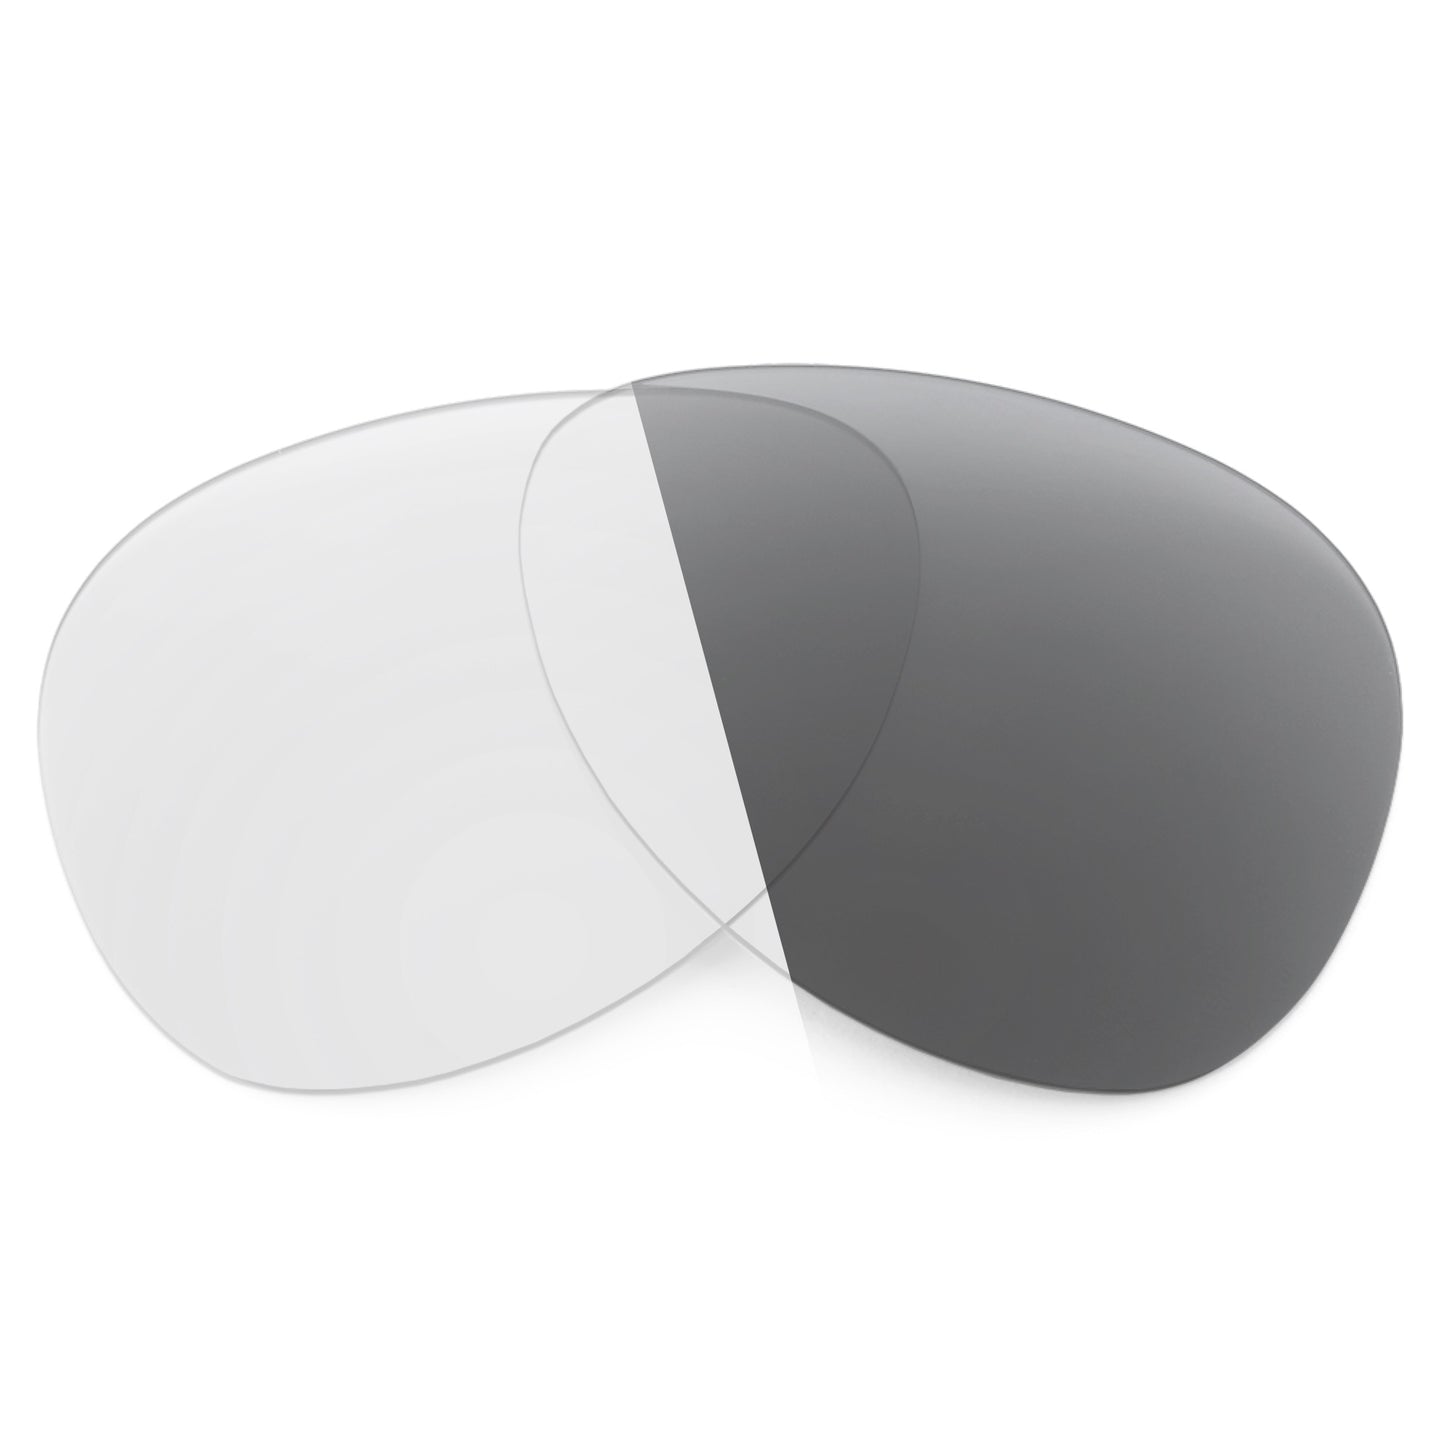 Revant replacement lenses for Ray-Ban RB8307 55mm Non-Polarized Adapt Gray Photochromic